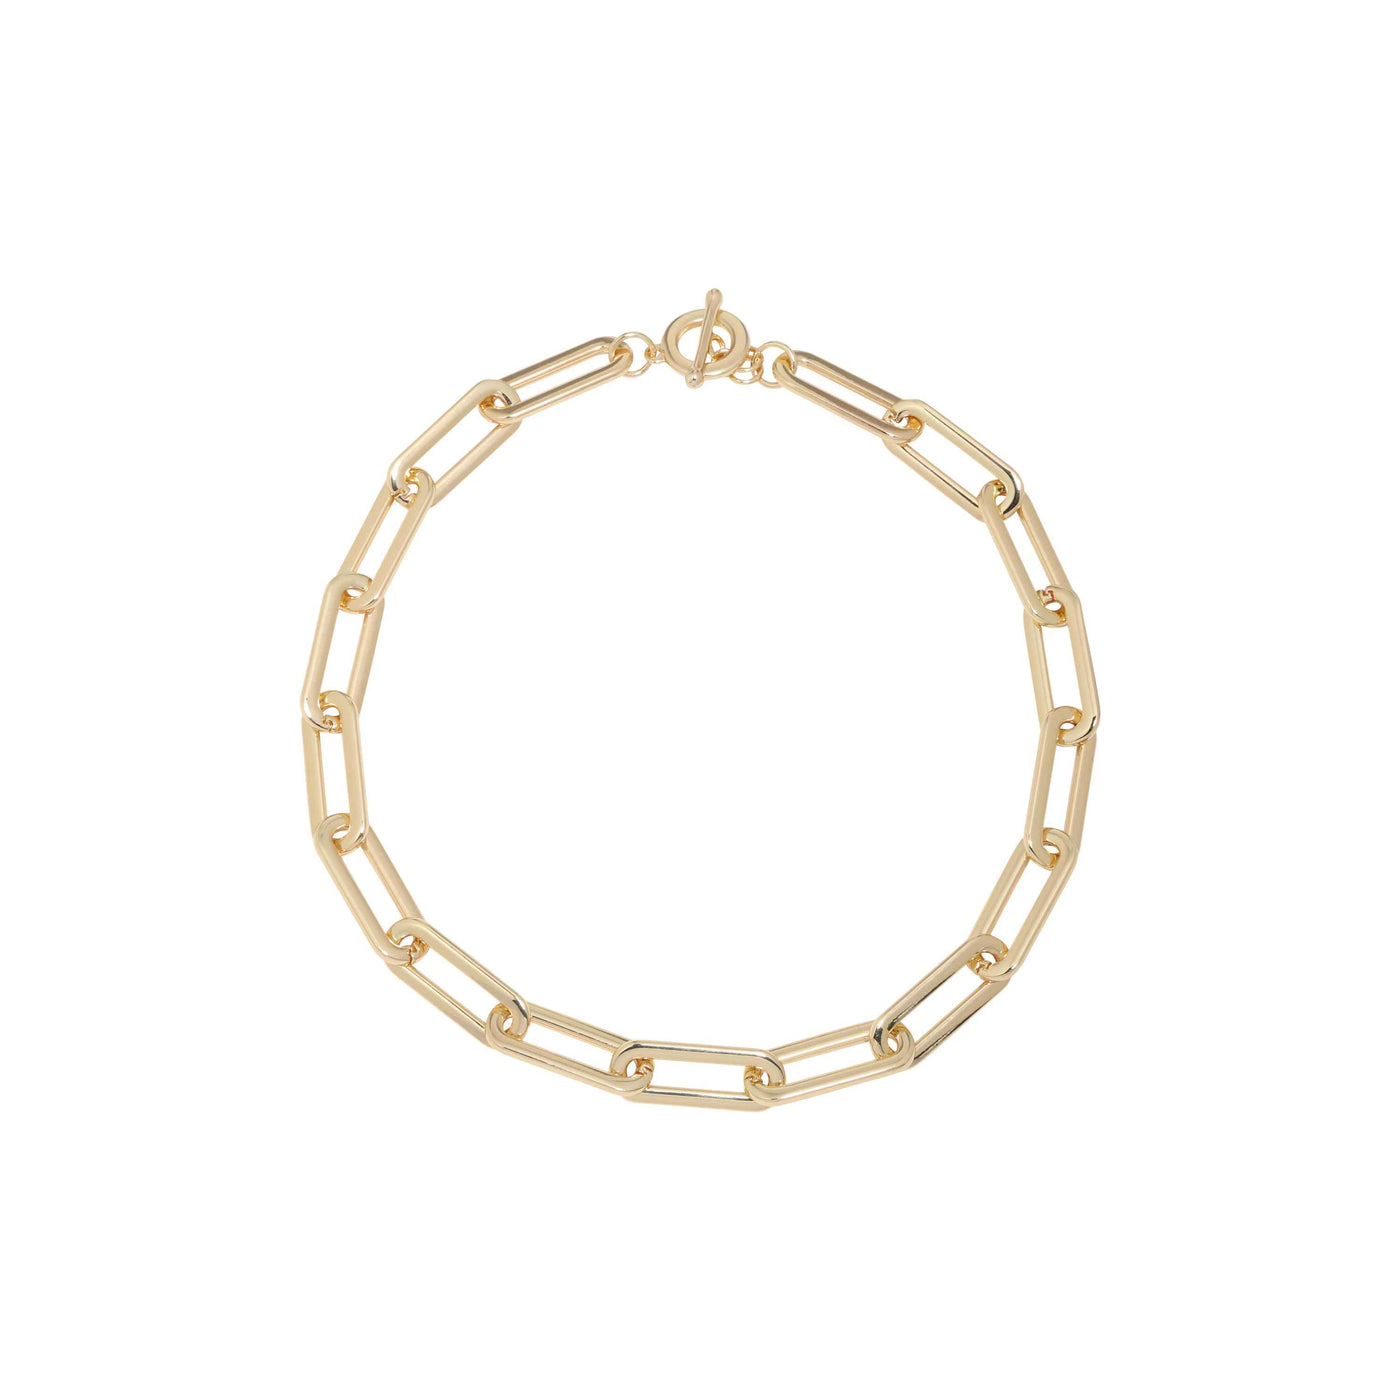 Merx - Large Paperclip Chain Short Necklace in Gold